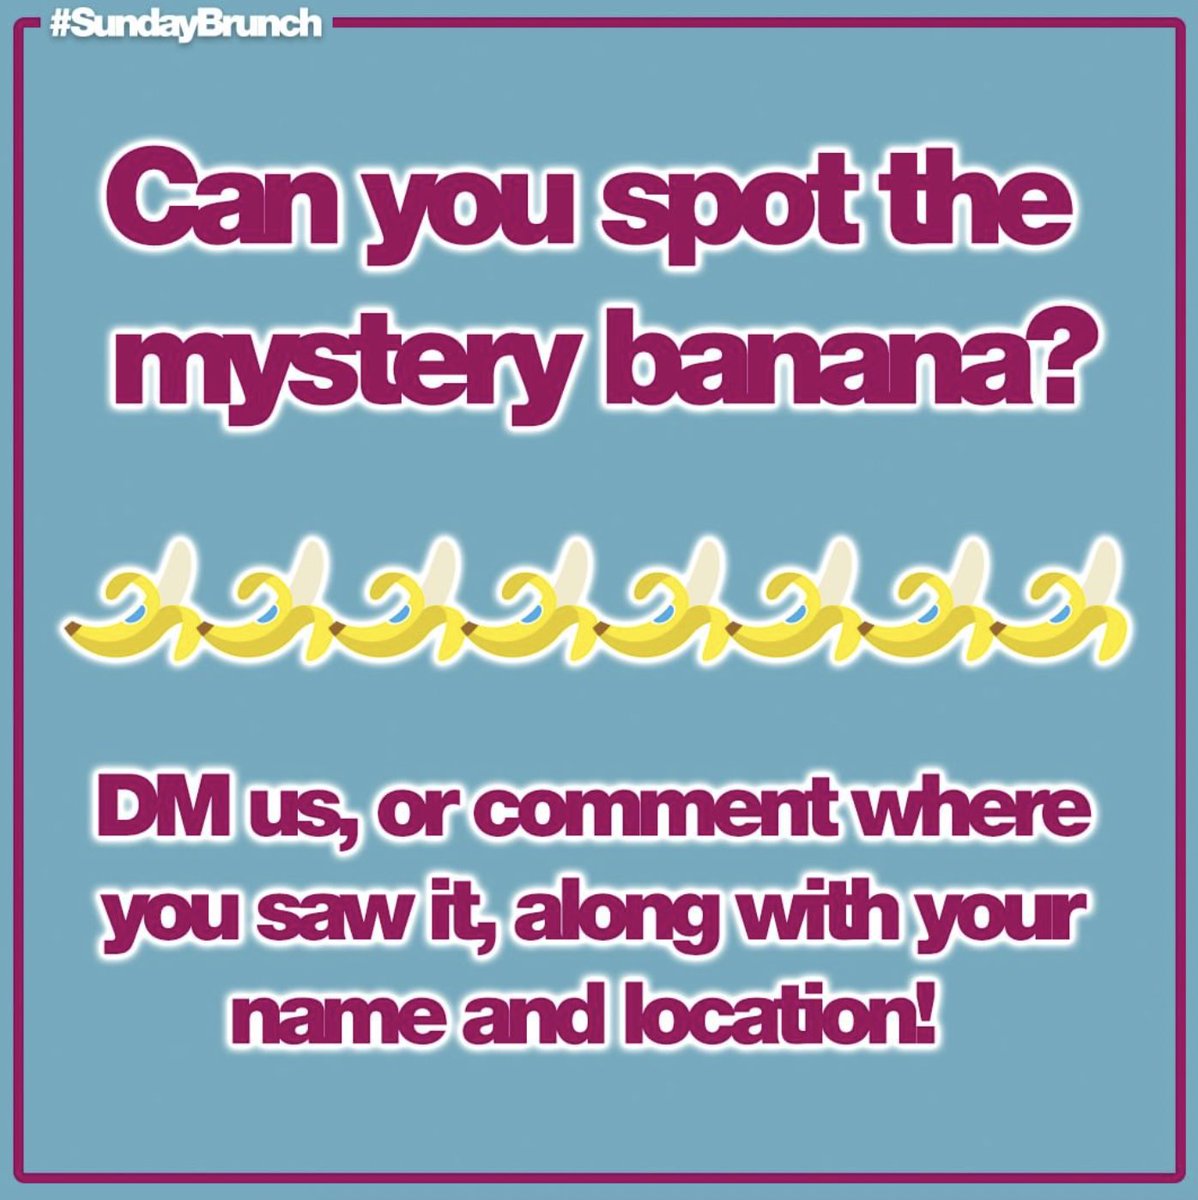 Can you spot the mystery banana in today’s show? 🍌 As soon as you see it make sure to comment below where you saw it along with your name and location! #SundayBrunch